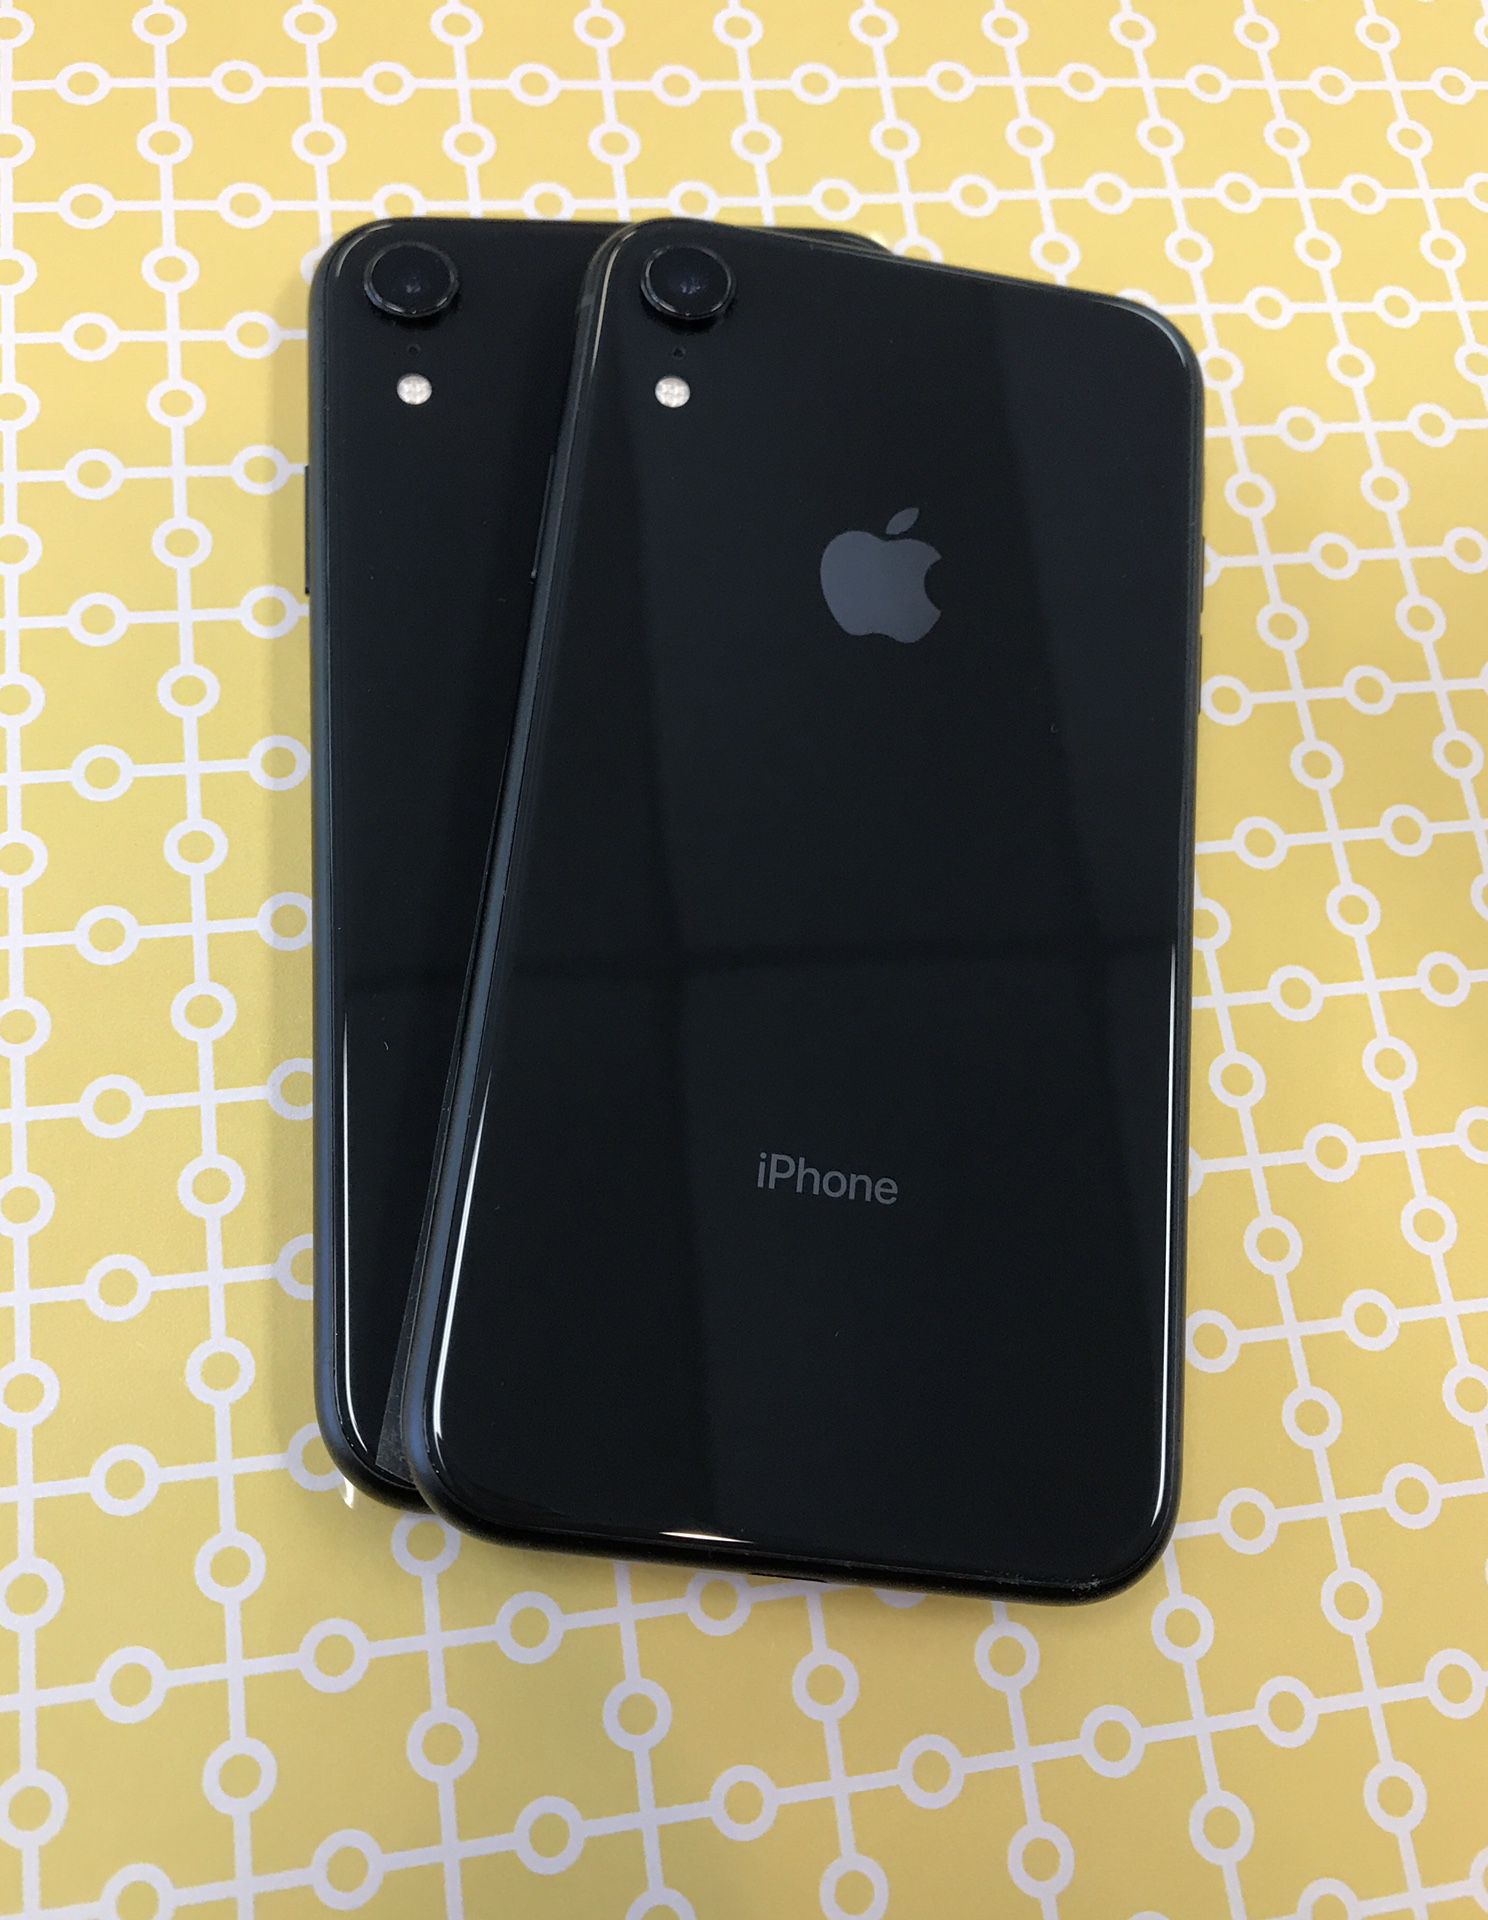 iPhone XR 64gb Unlocked Excellent Condition $519 each